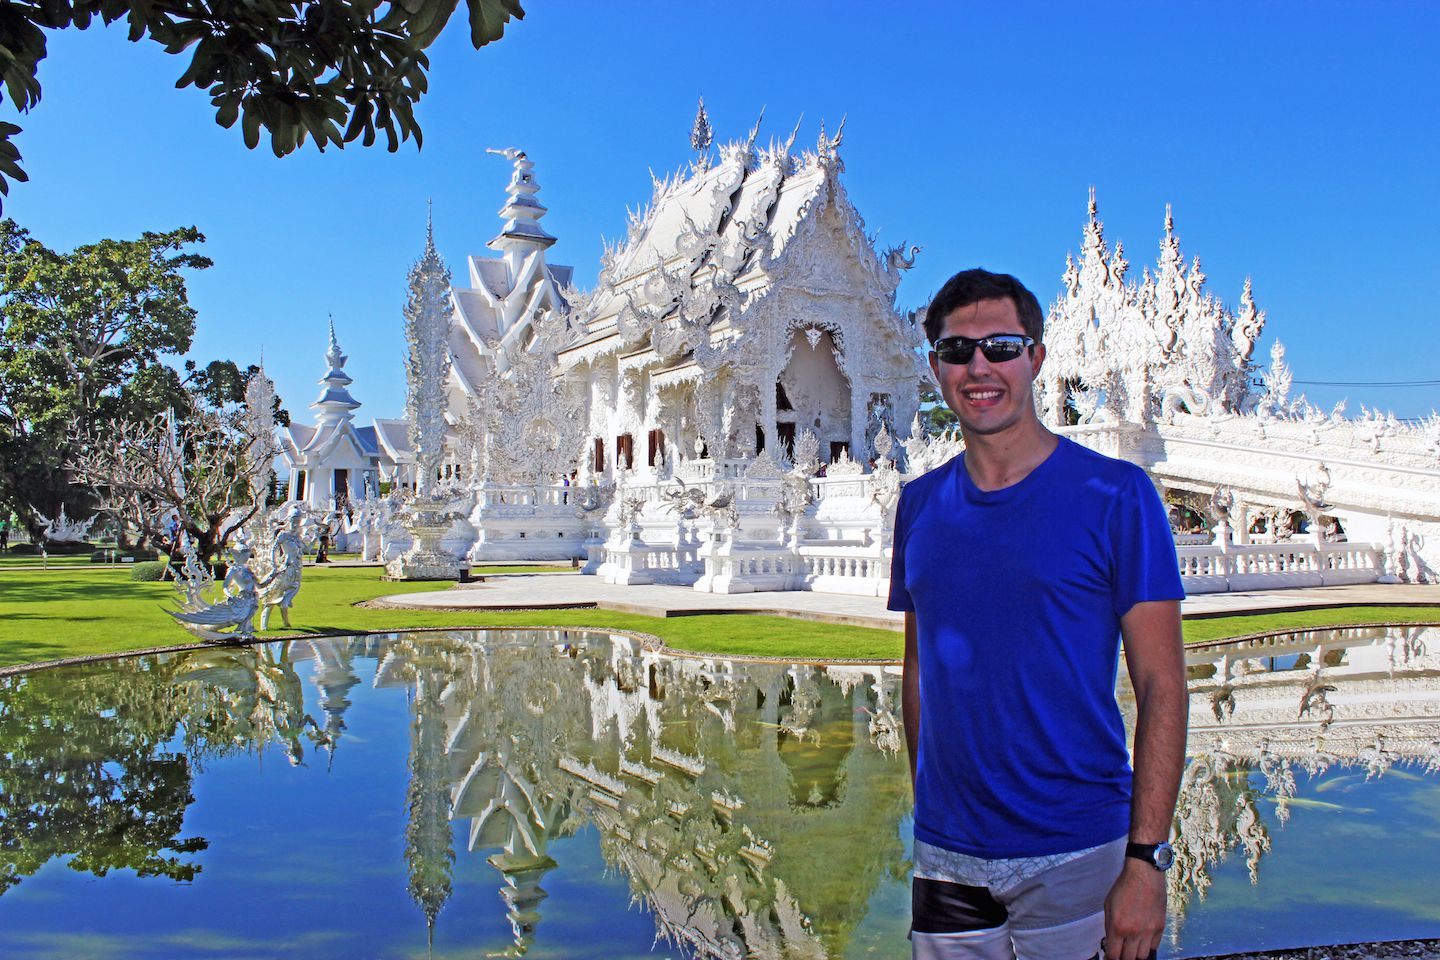 Carlos at the White Temple in Chiang Rai